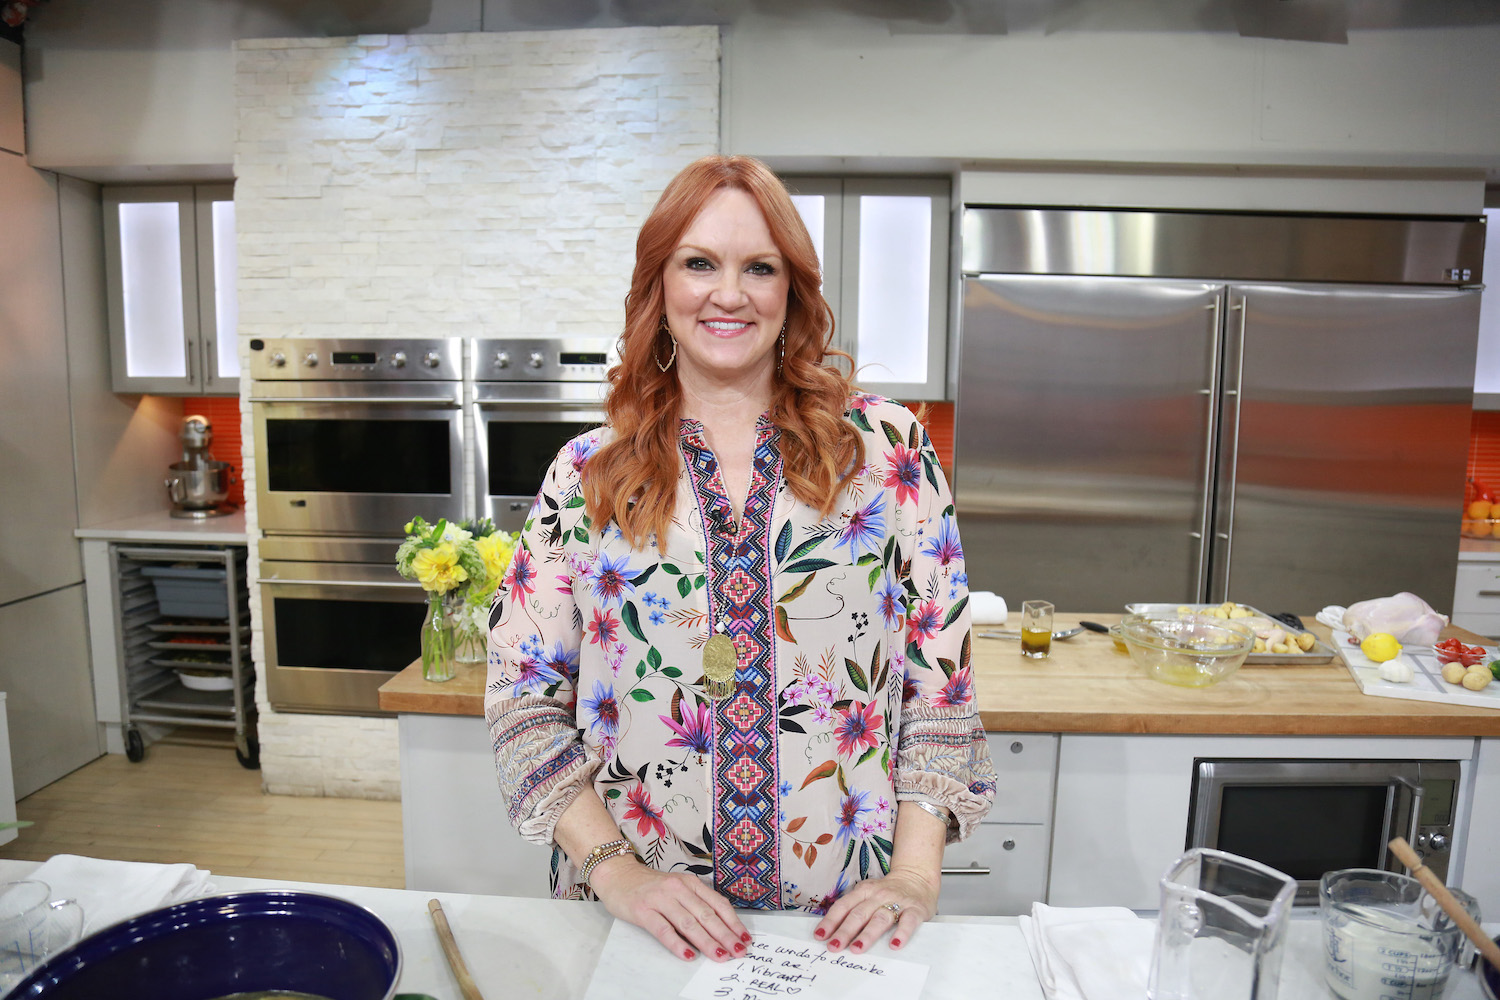 'The Pioneer Woman' star Ree Drummond wears a bright top and smiles on the set of 'Today' in 2019